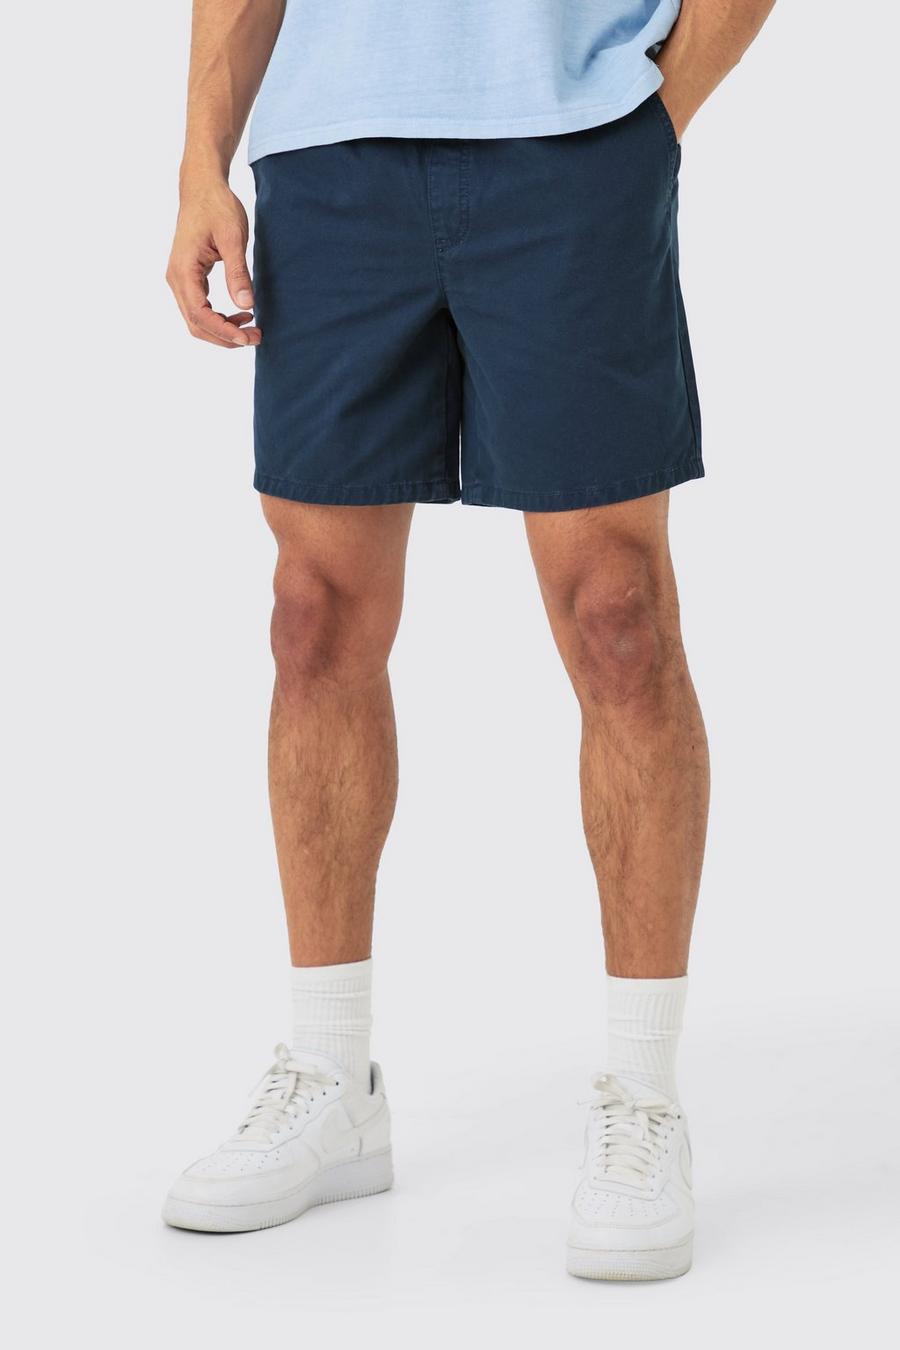 Shorter Length Relaxed Fit Chino Shorts in Navy